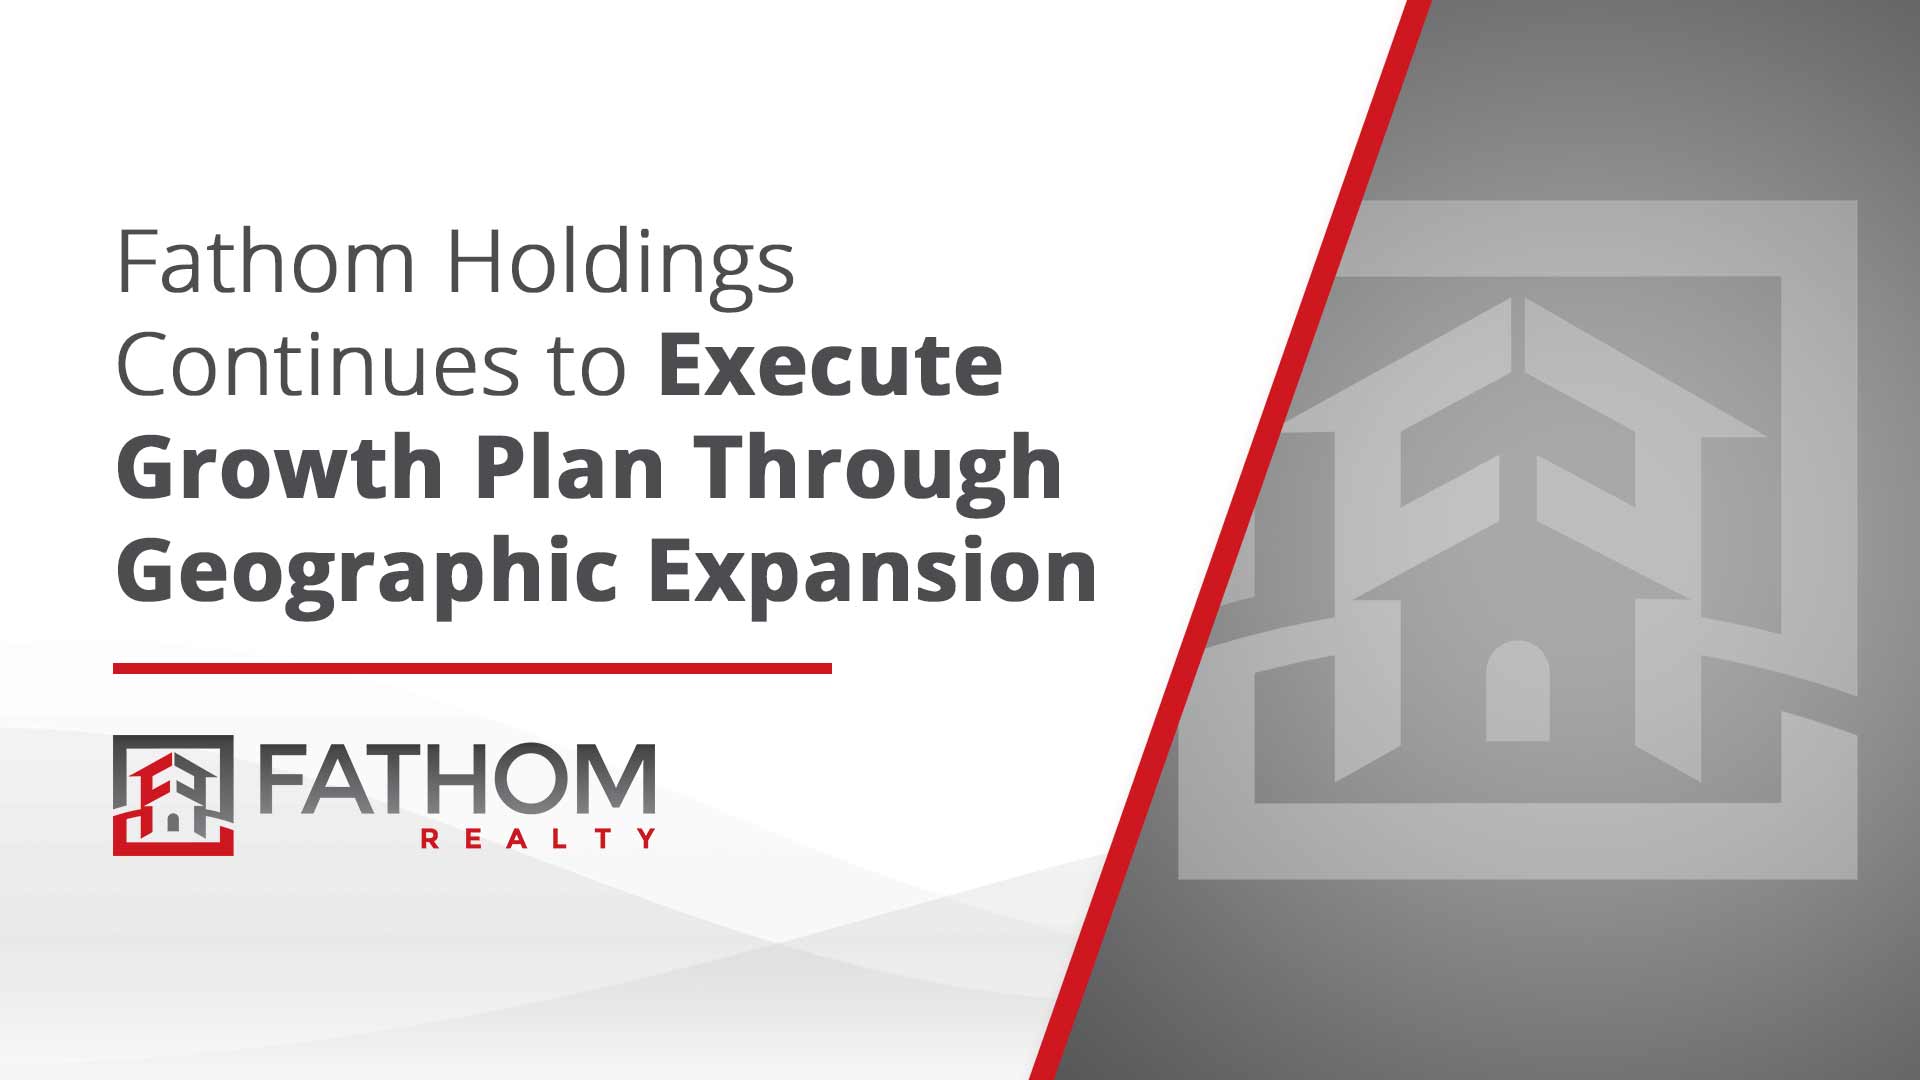 Featured image for “Fathom Holdings Continues to Execute Growth Plan Through Geographic Expansion”